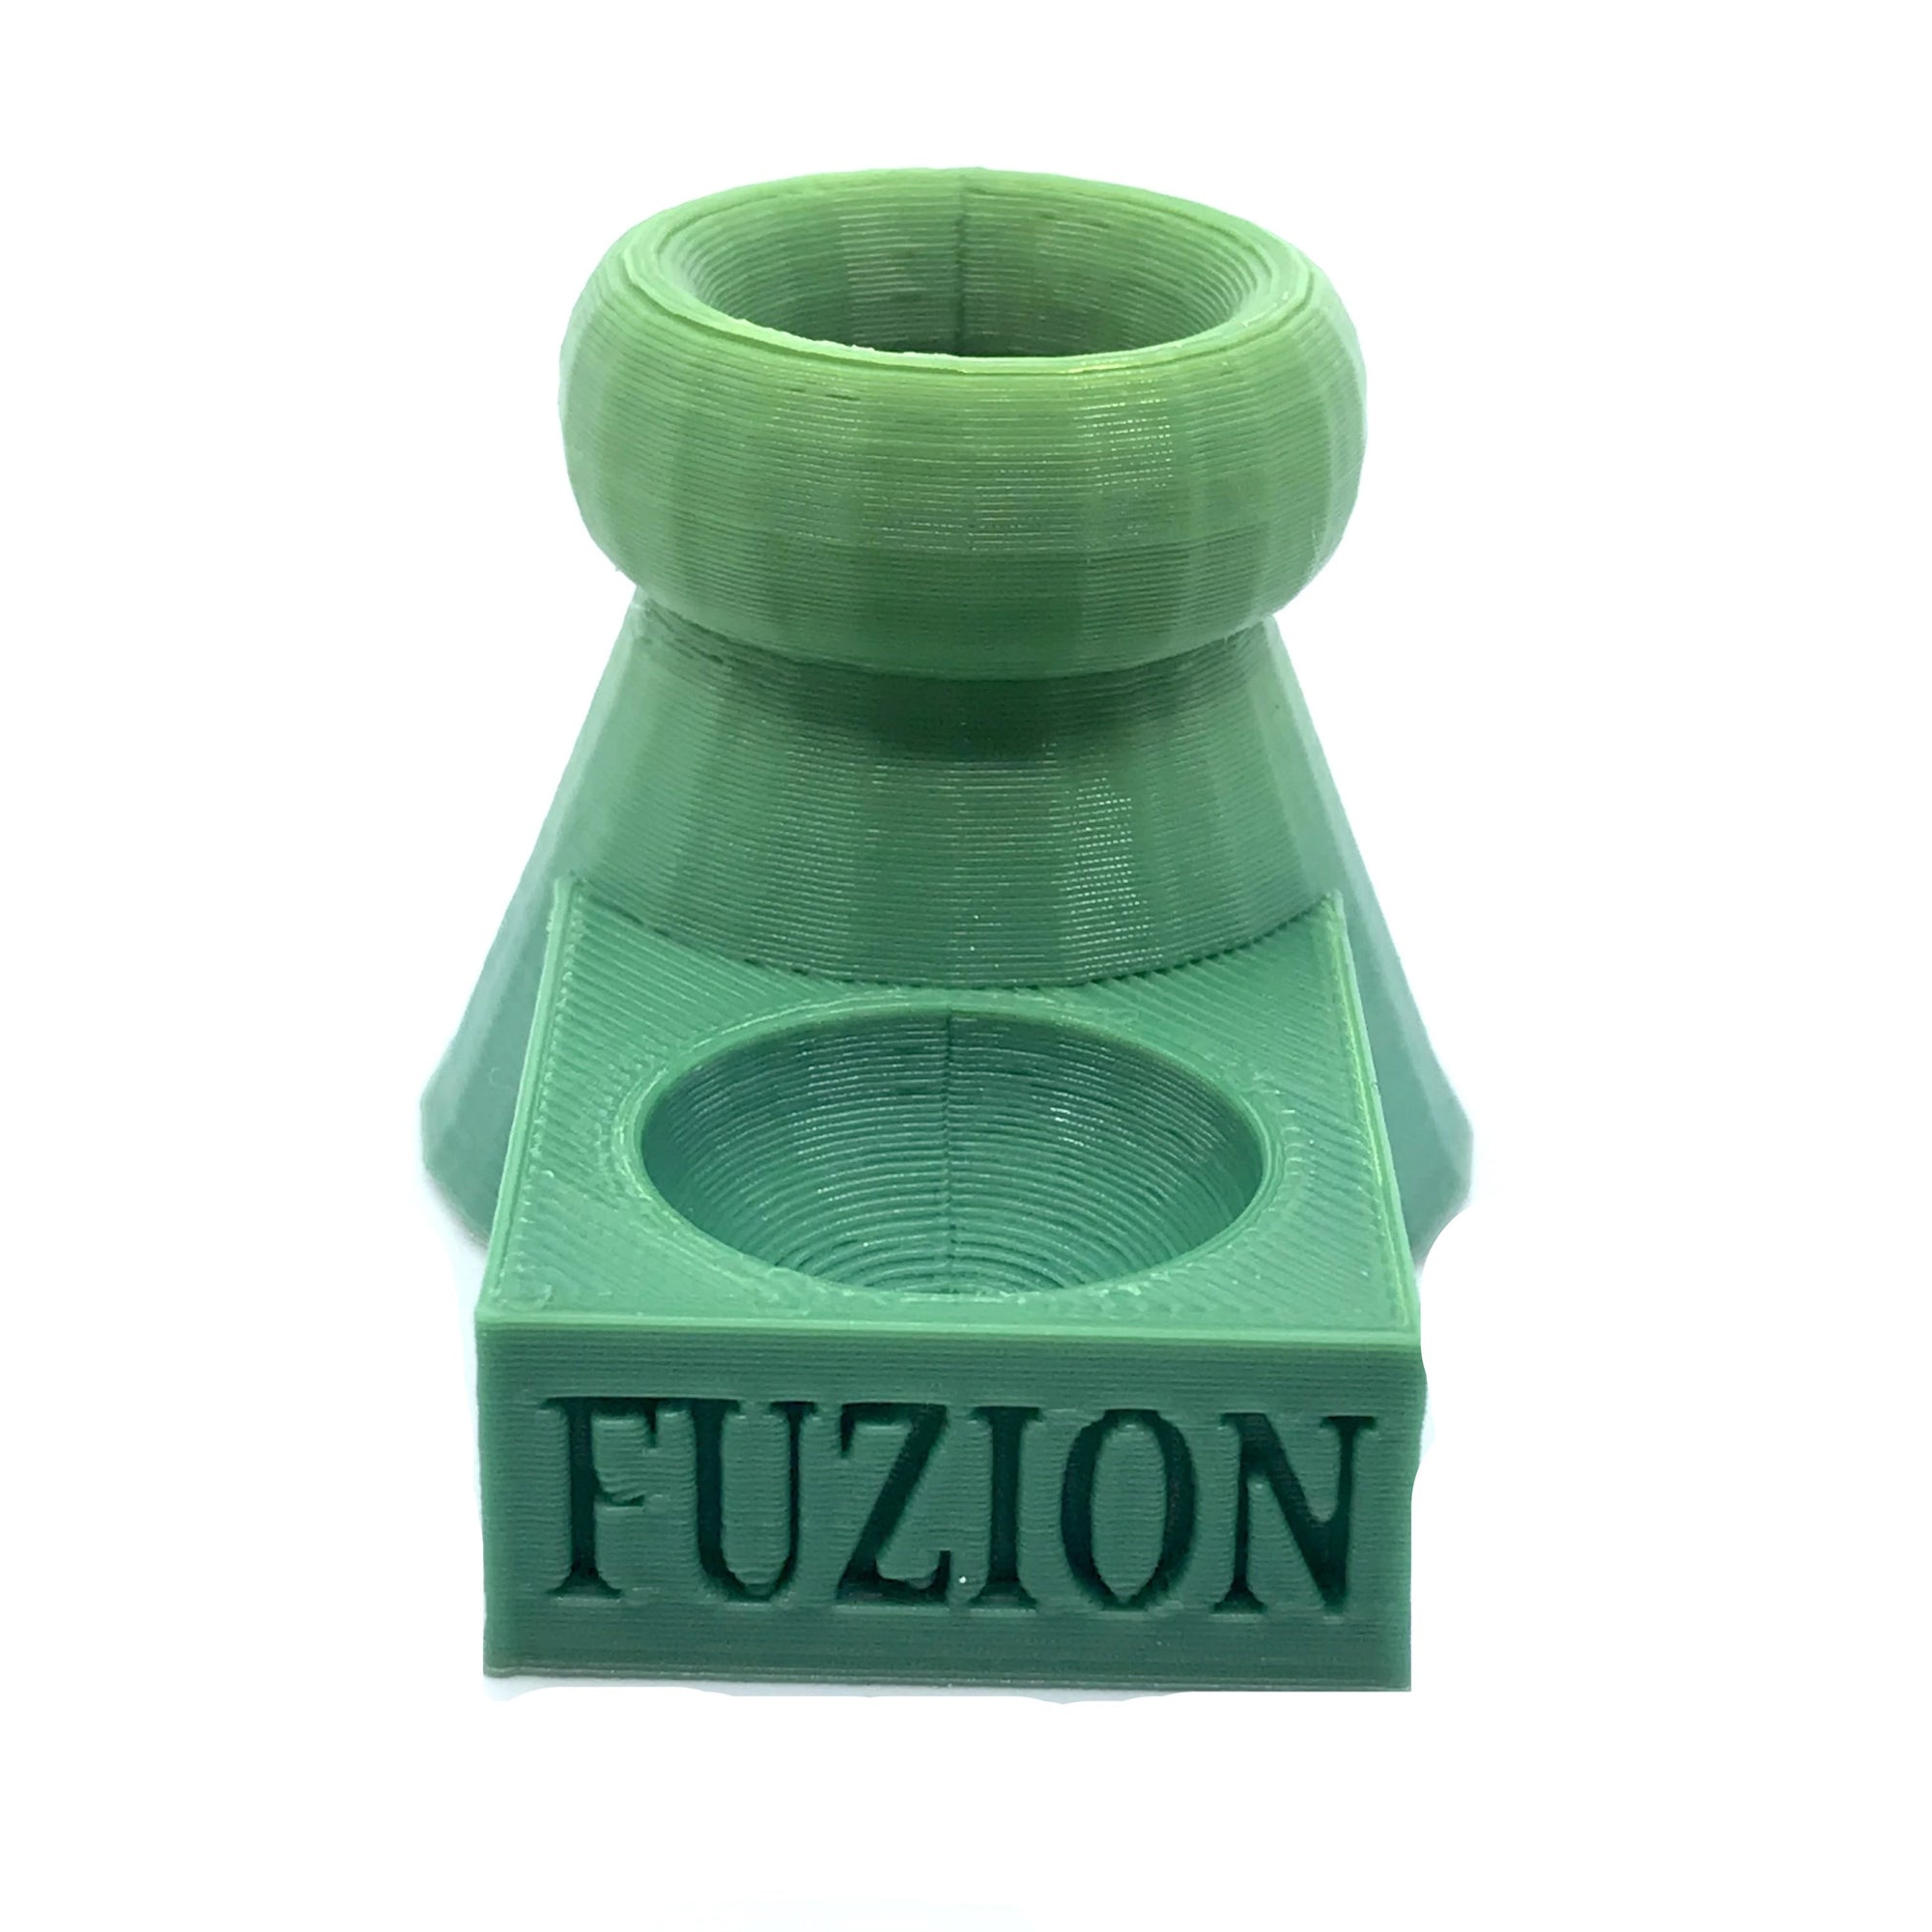 FUZION 3D Printed Bubble Cap and Terp Pearl Stand (Green Fade) show variants